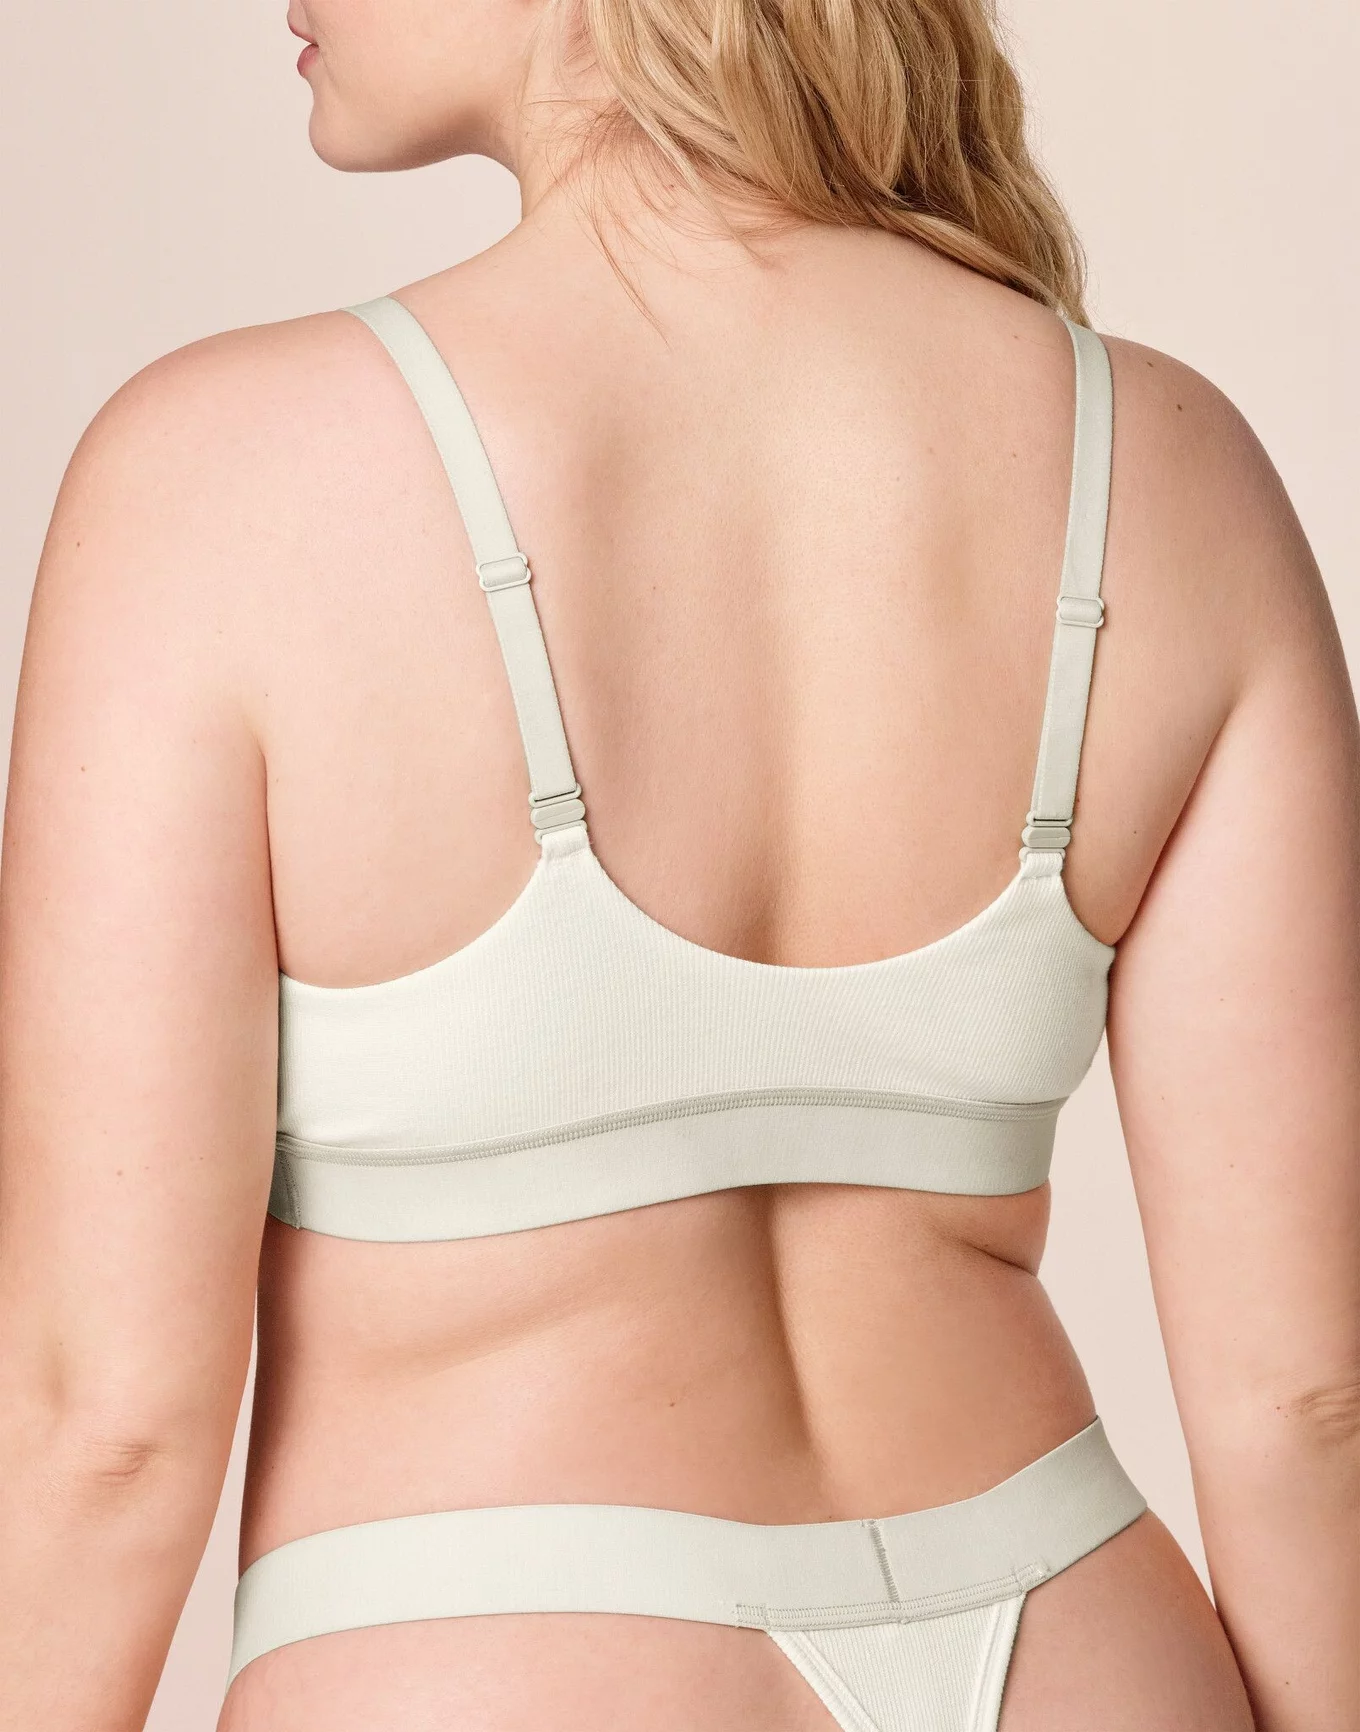 Astro Rory sports bra in yellow - The Upside